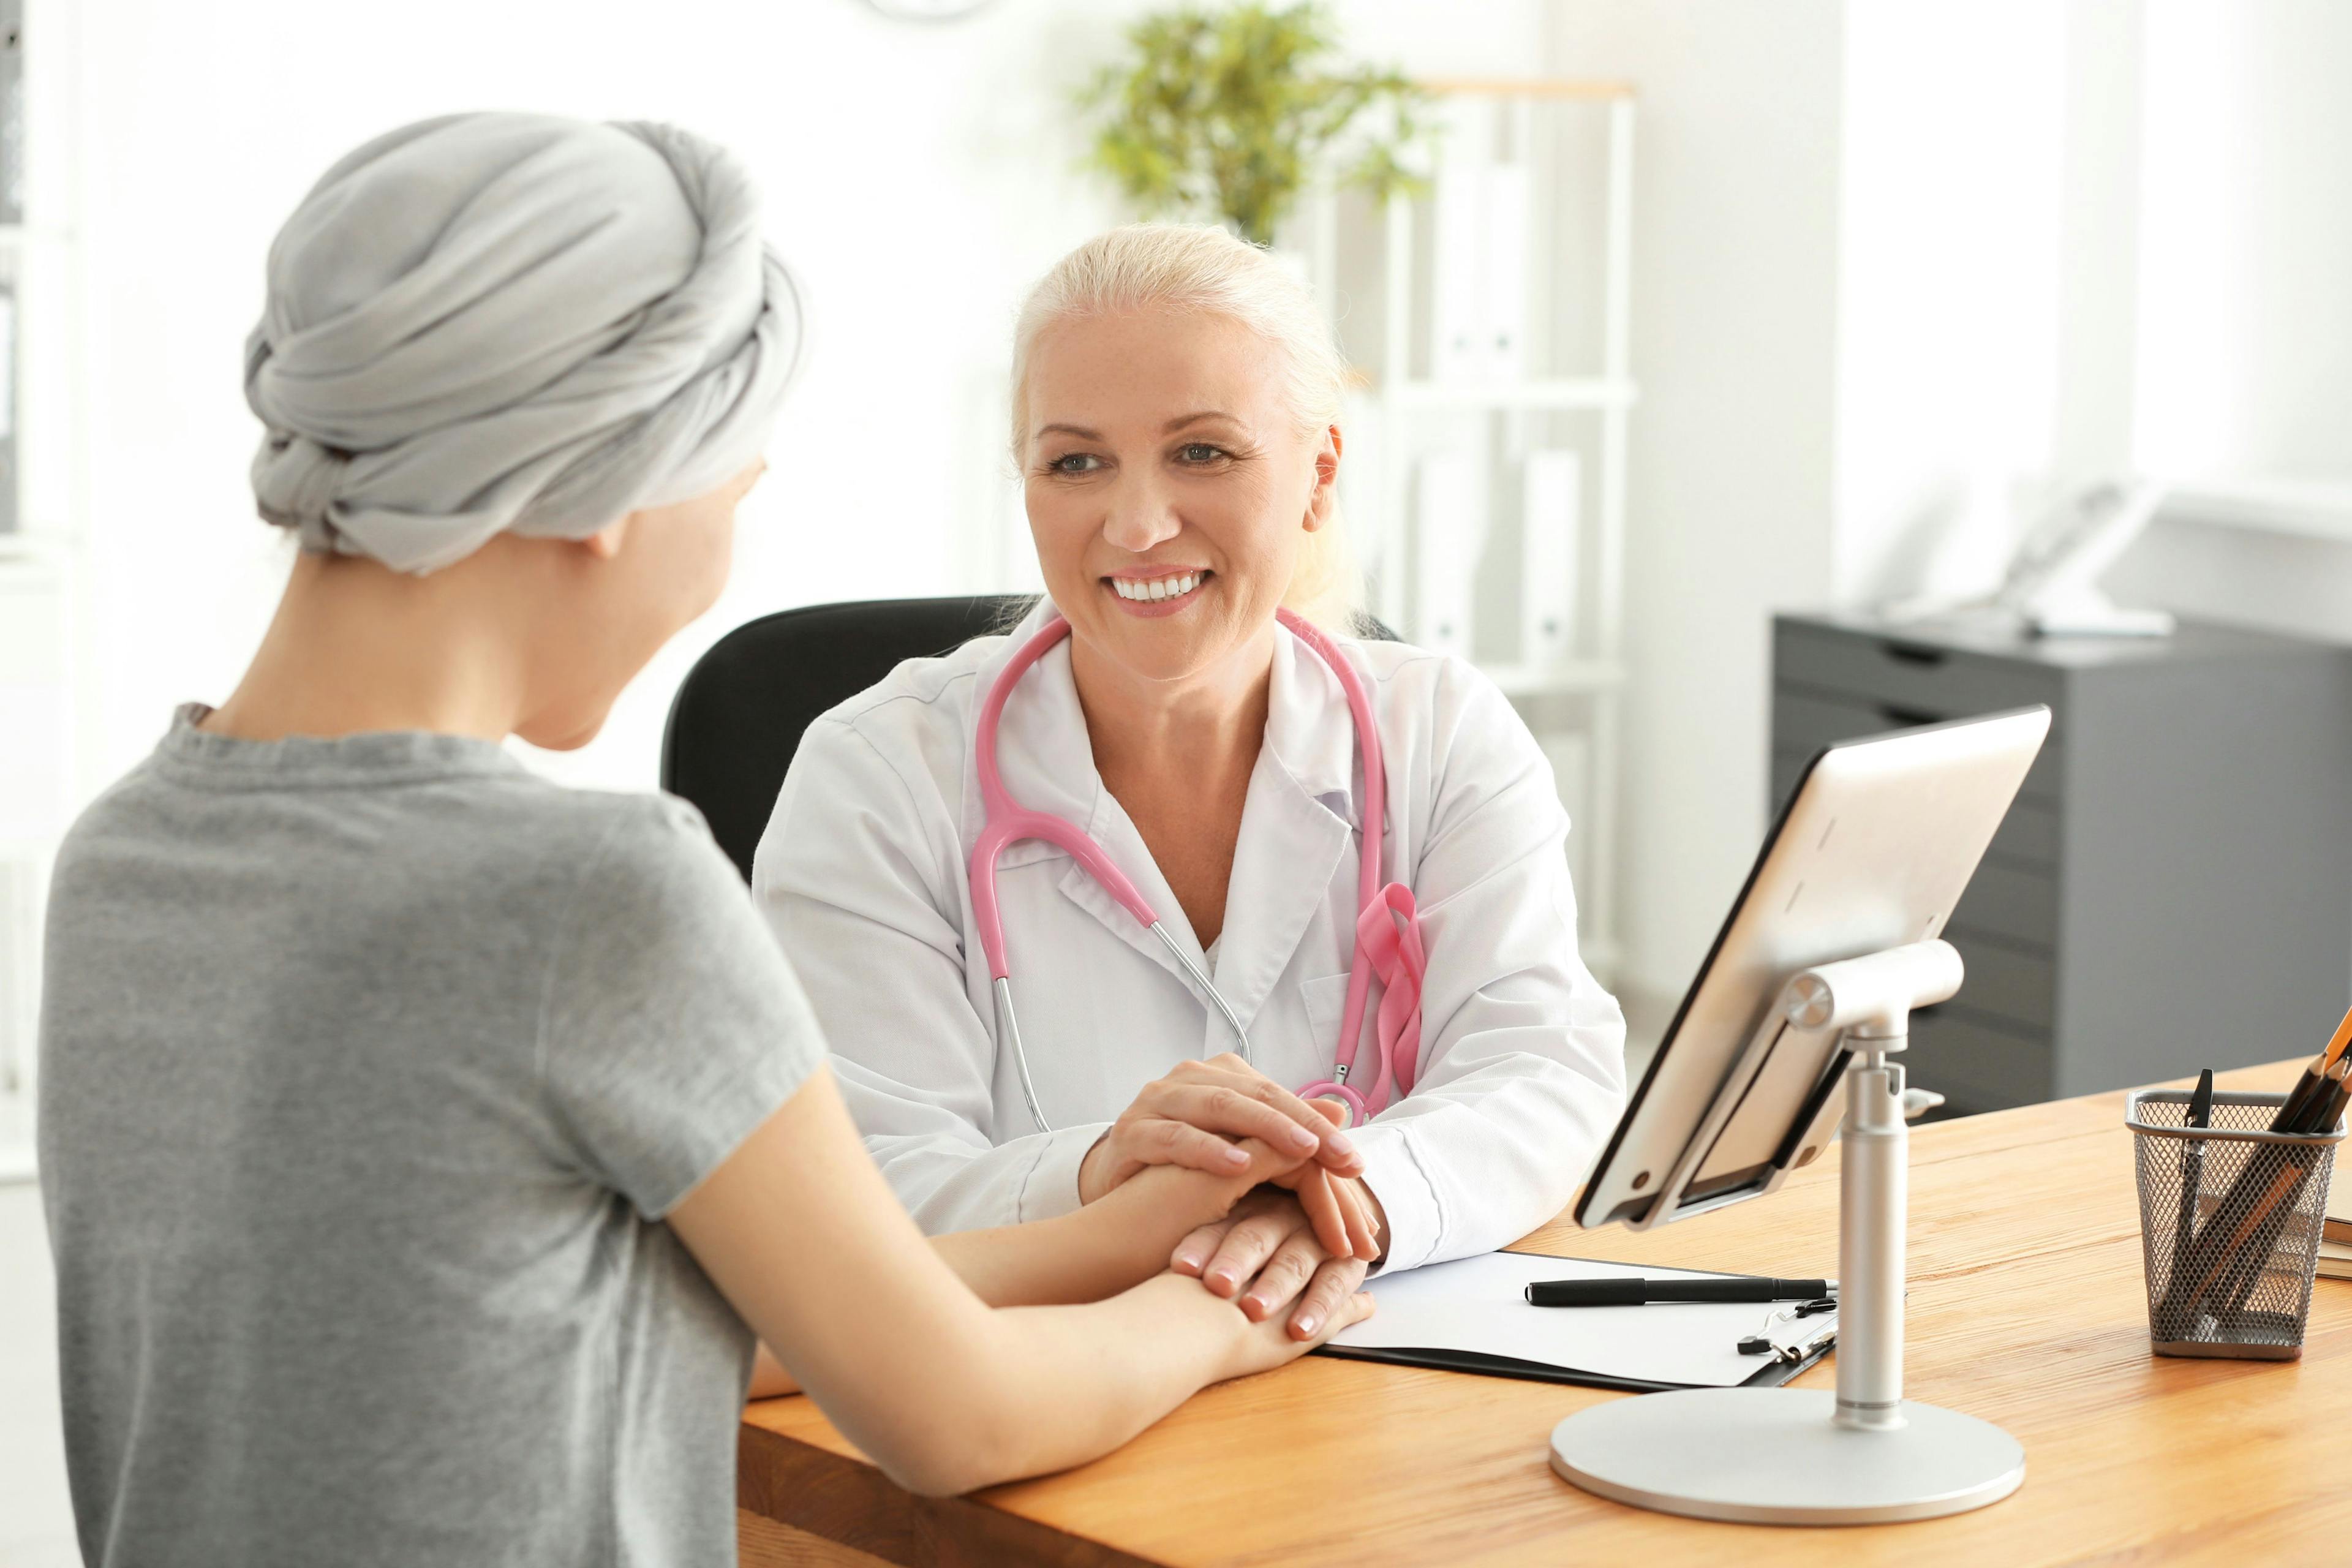 Doctor and patient with breast cancer. | Image Credit: Pixel-Shot - stock.adobe.com